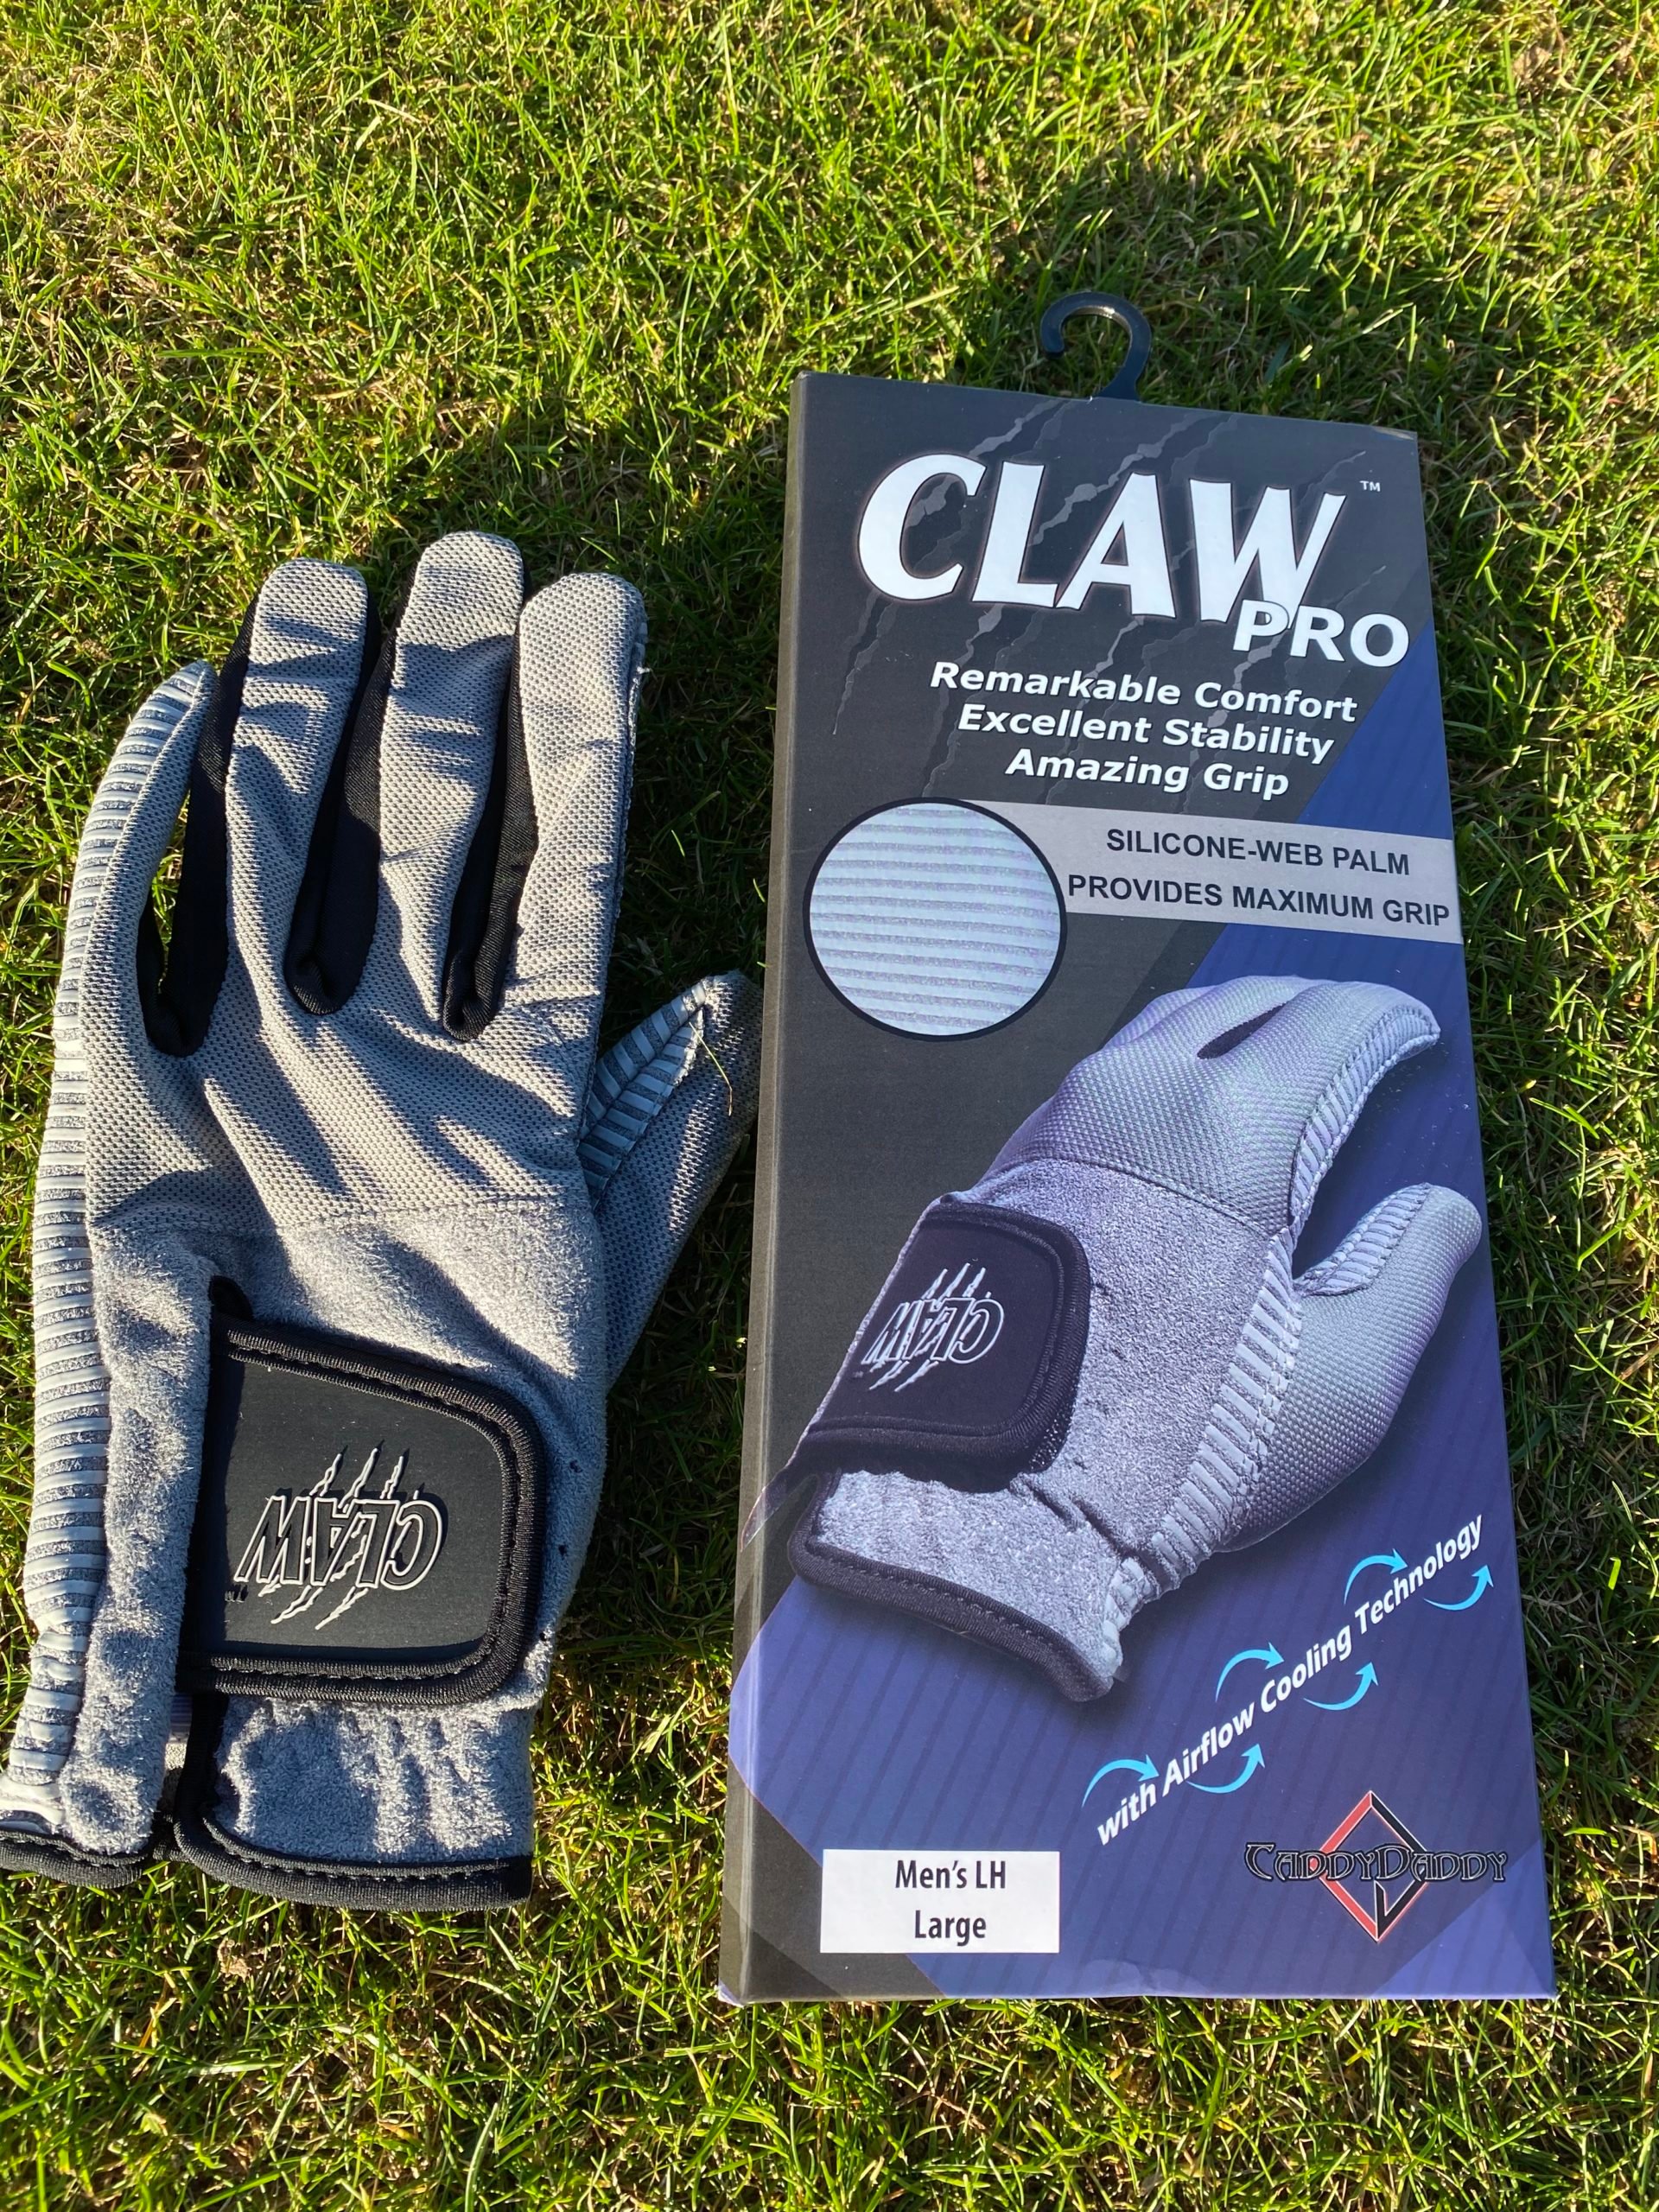 The Claw Golf Glove. Superior grip, wet or dry!!